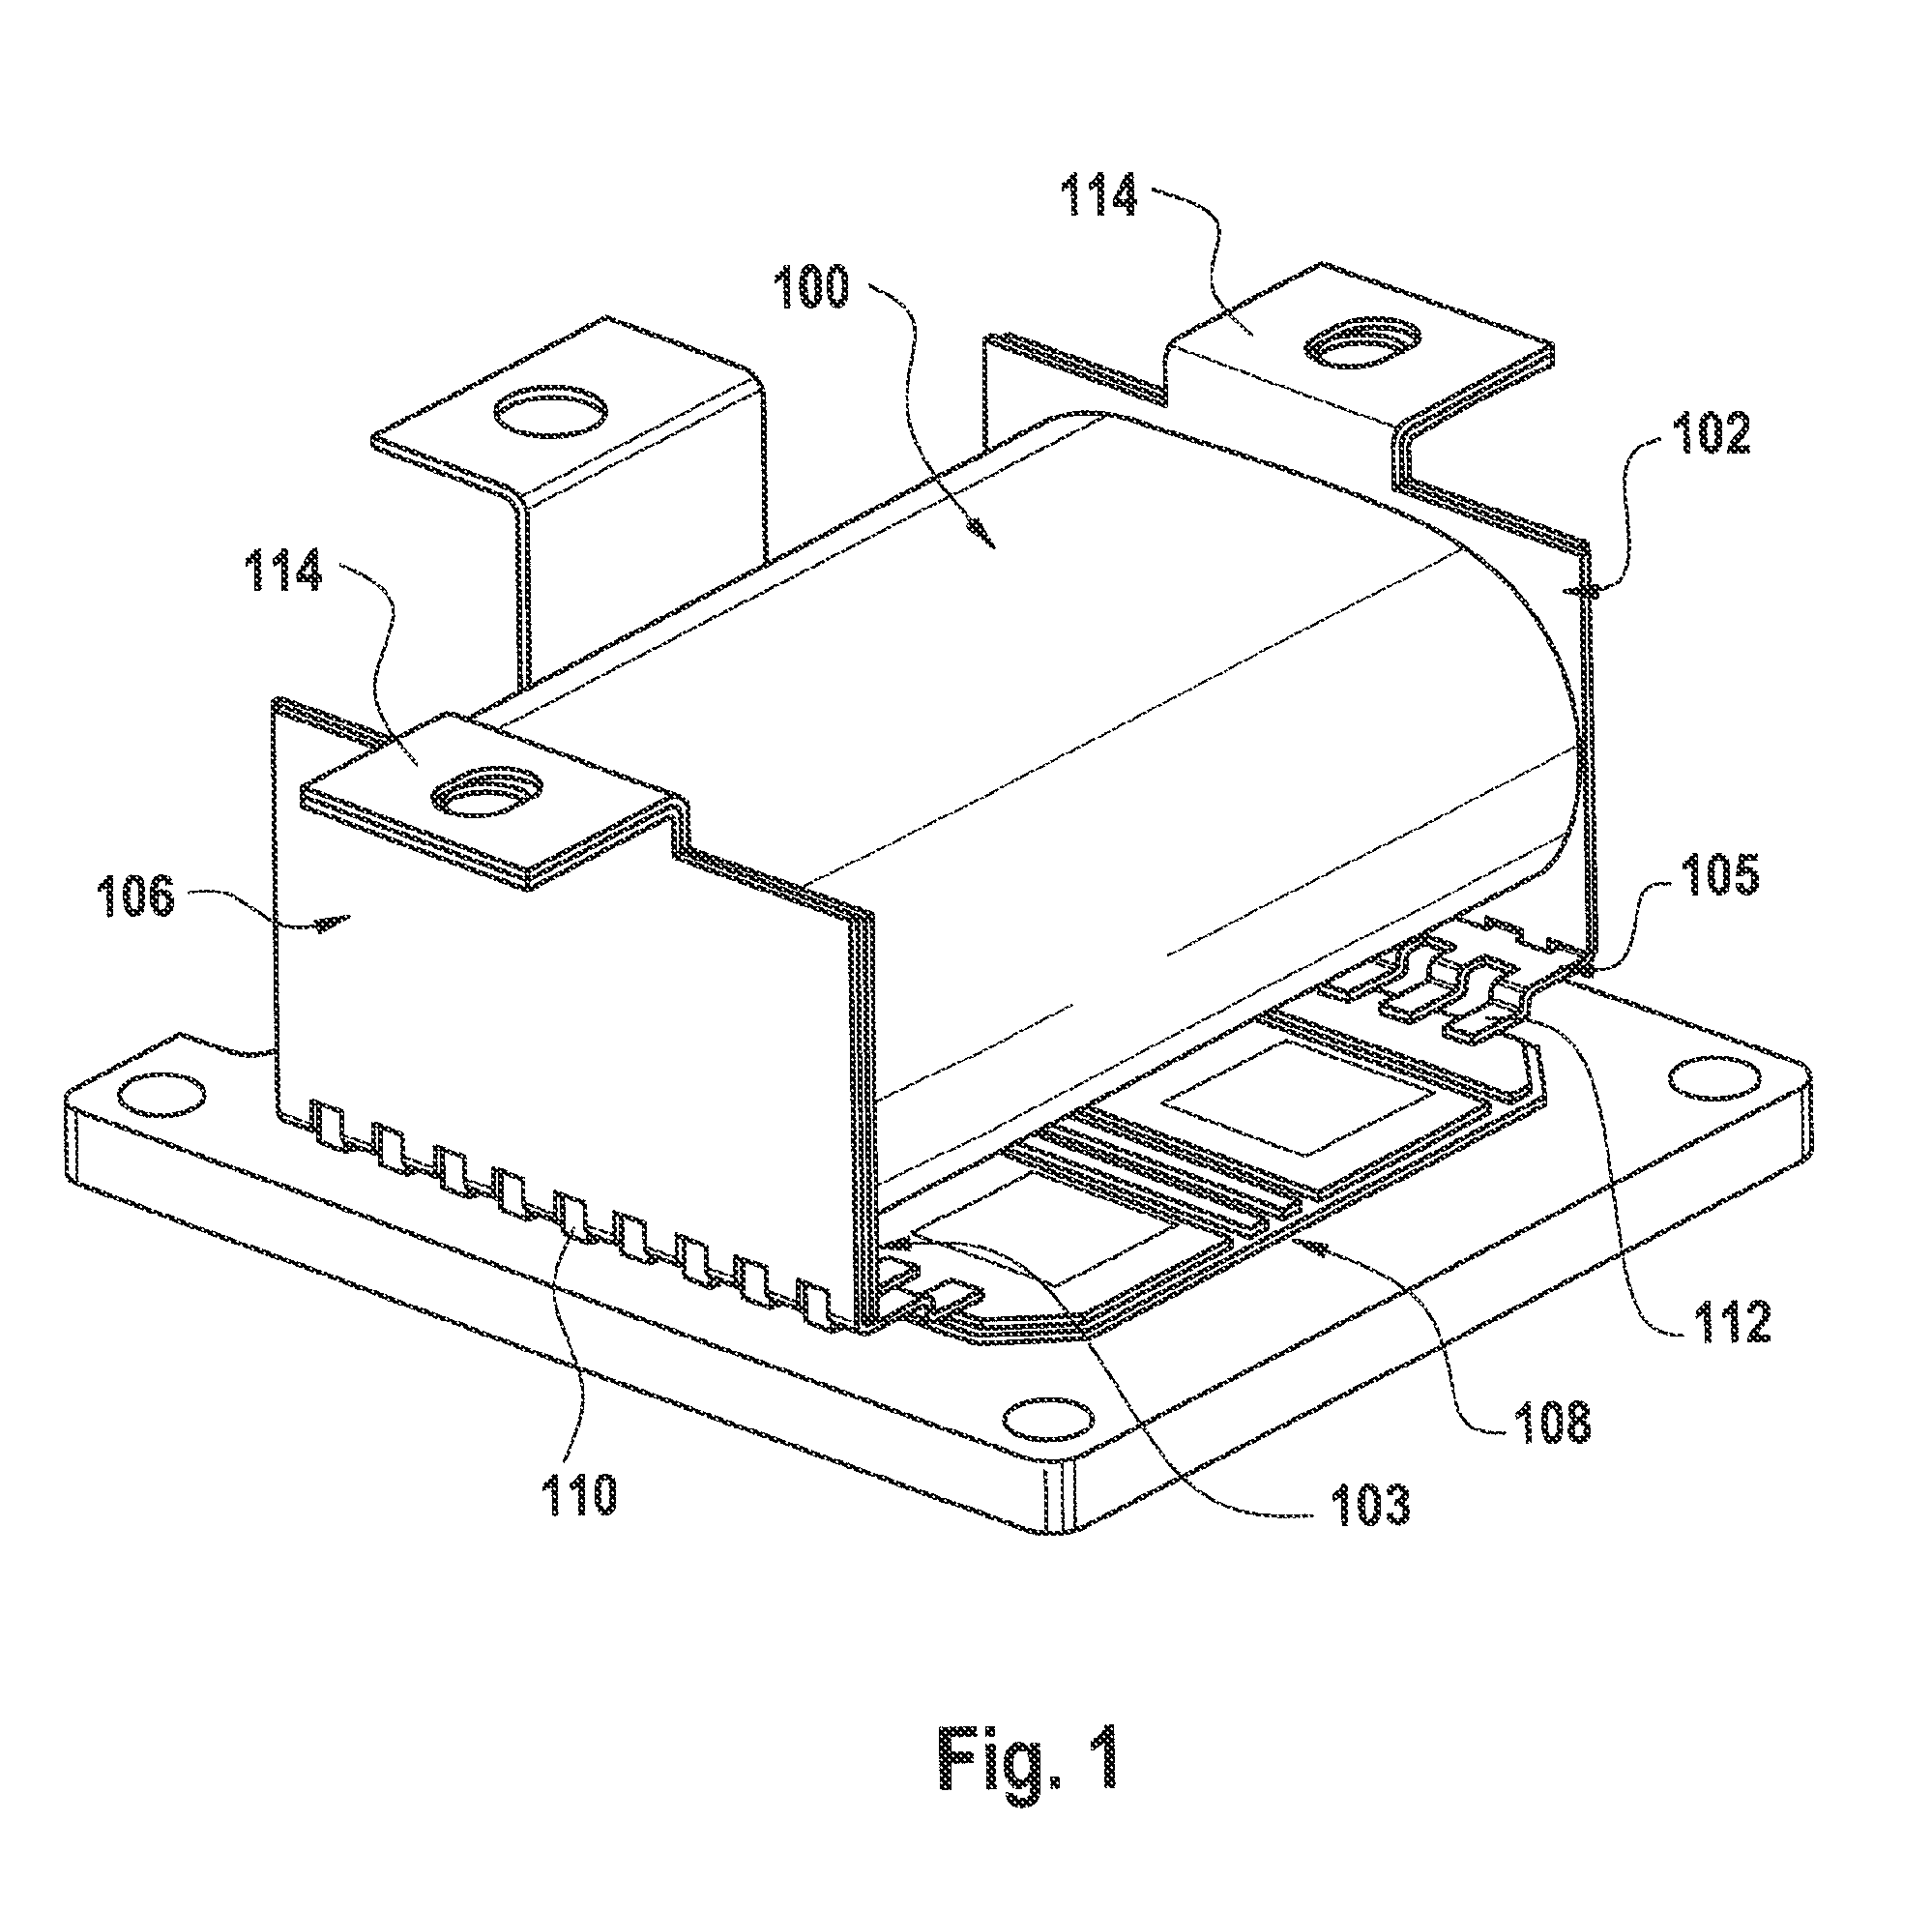 Capacitor arrangement and method for producing a capacitor arrangement